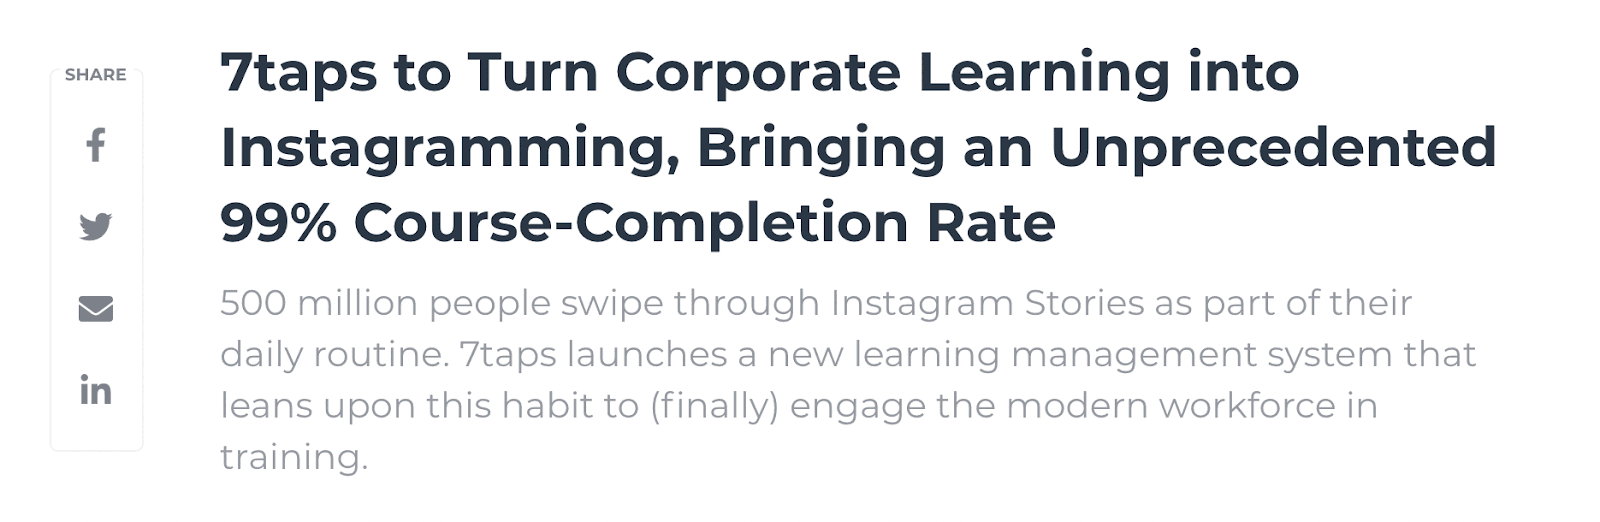 7taps to turn corporate learning into Instagramming, bringing an unprecedented 99% course-completion rate